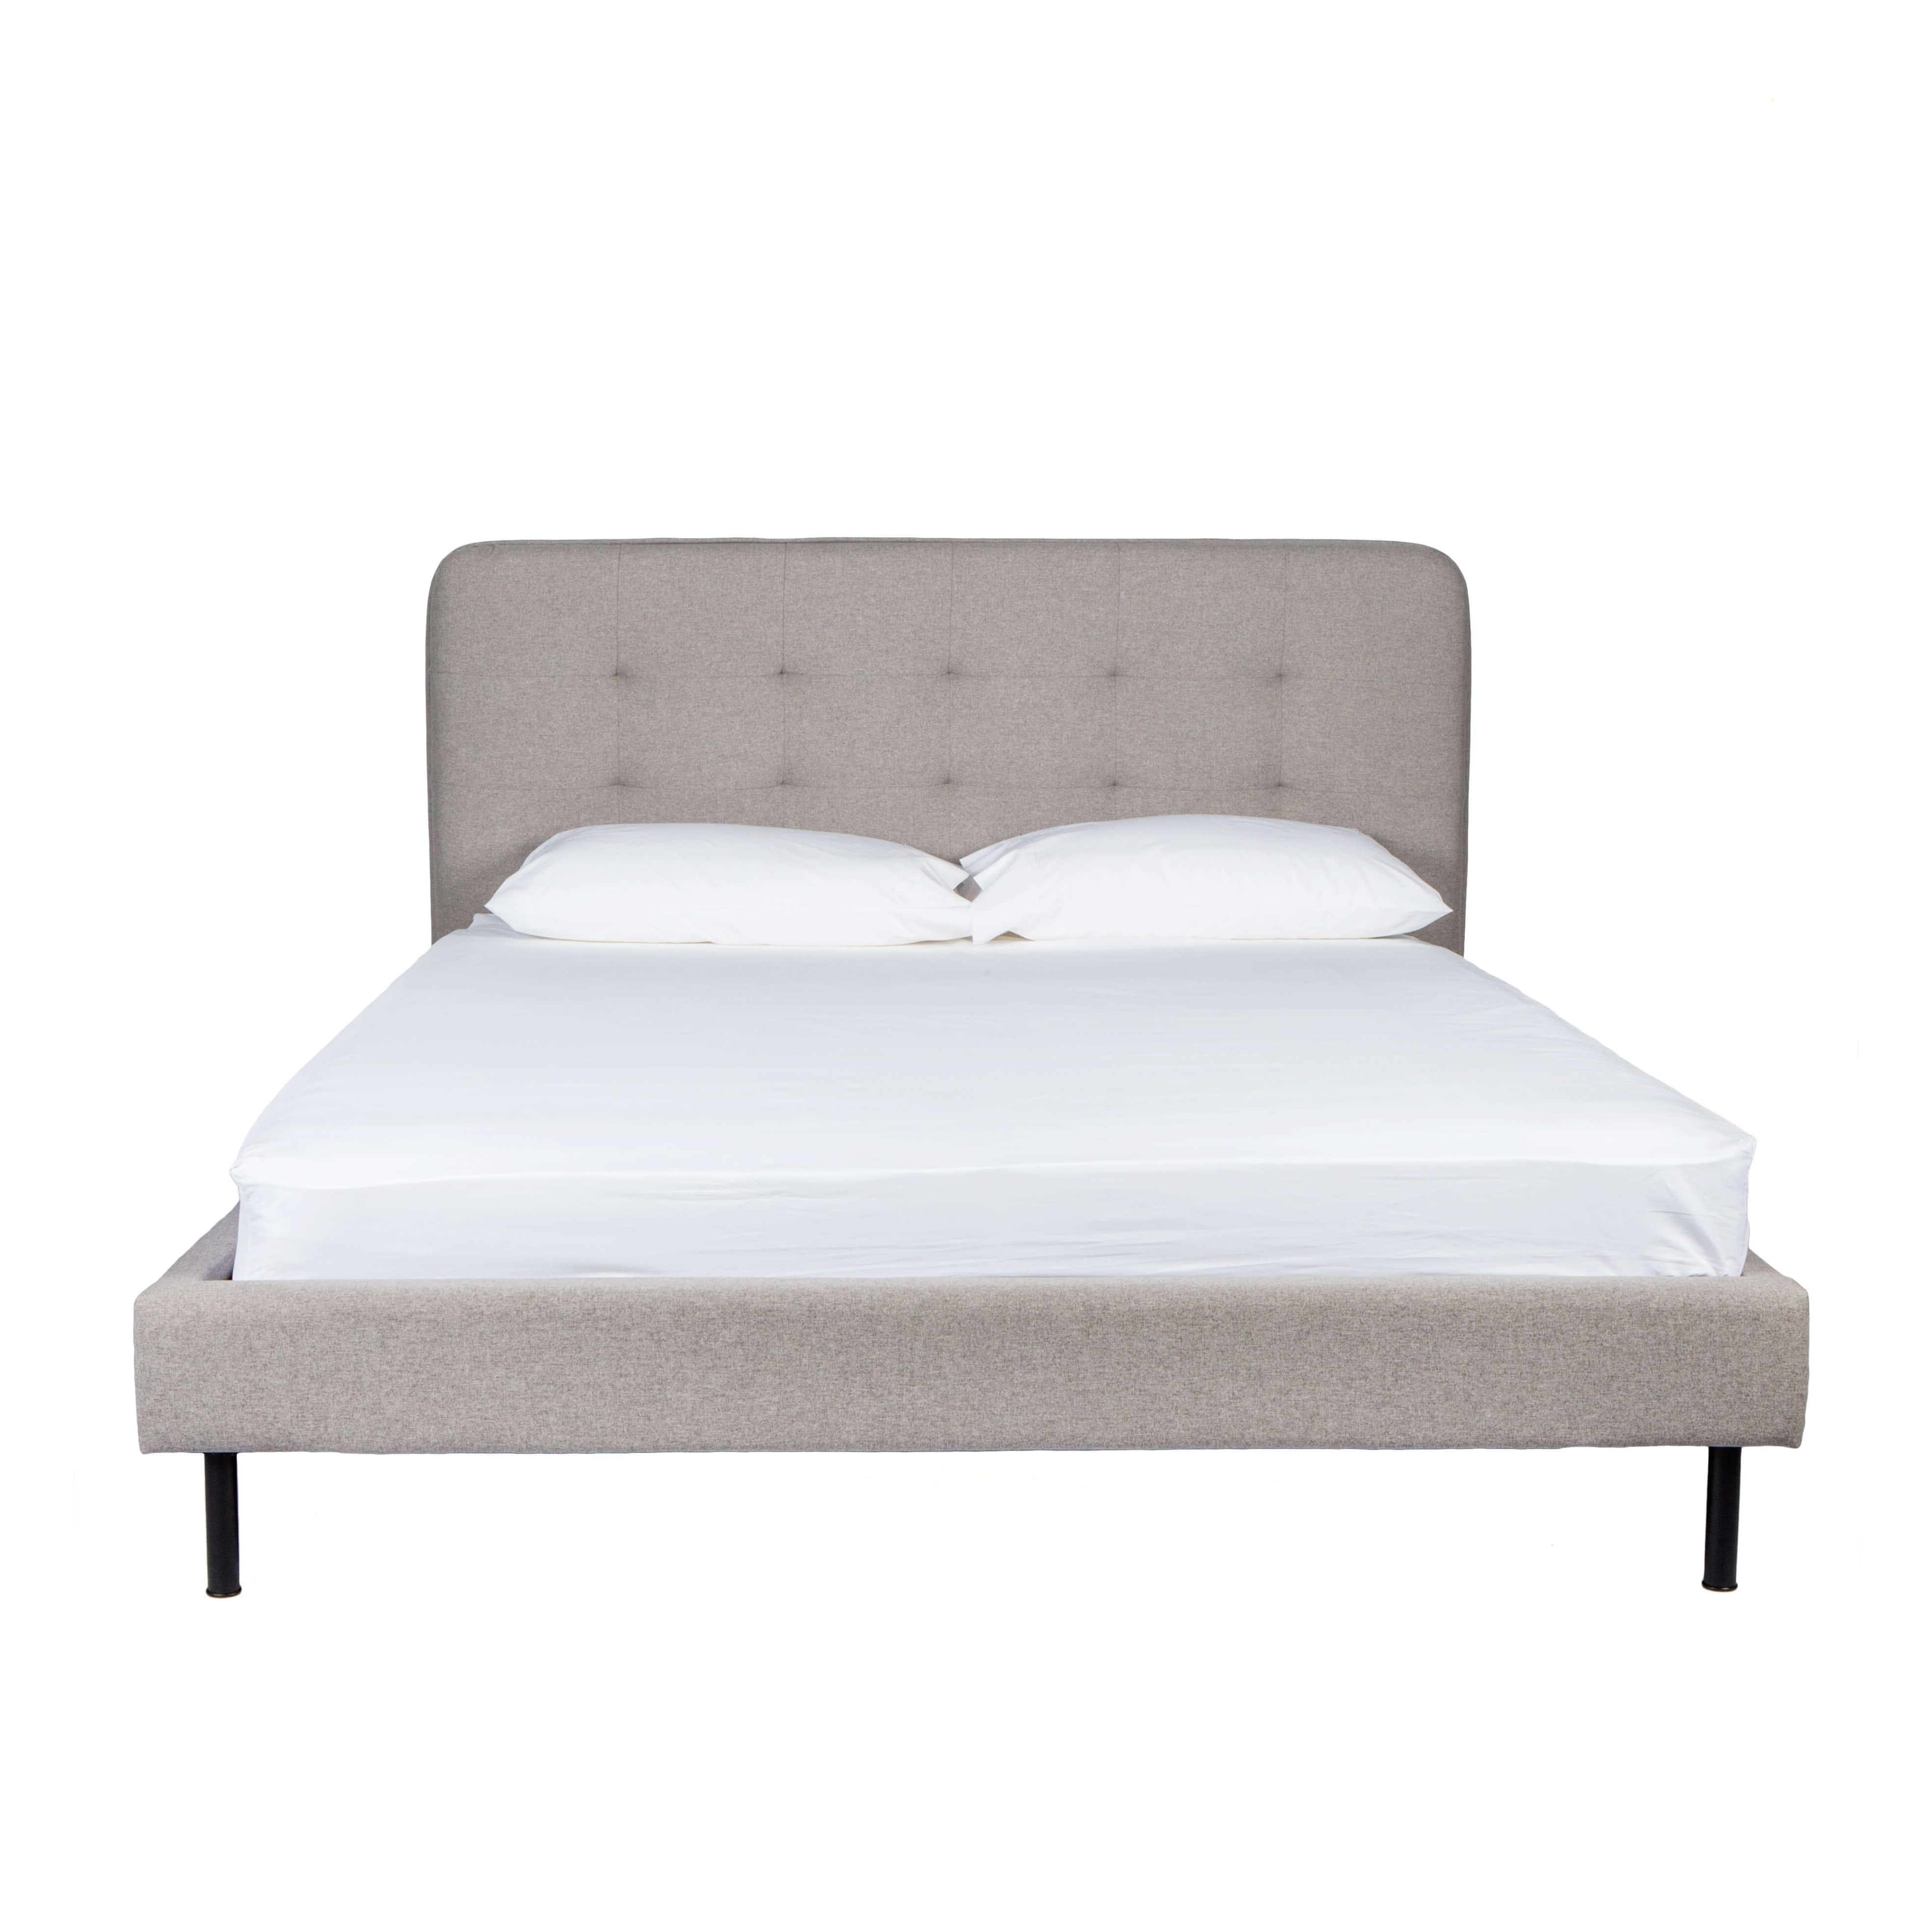 Queen Size Bed With Tufted Bedhead – Jaxon – Grey Inside Newest Jaxon Grey Upholstered Side Chairs (View 13 of 20)